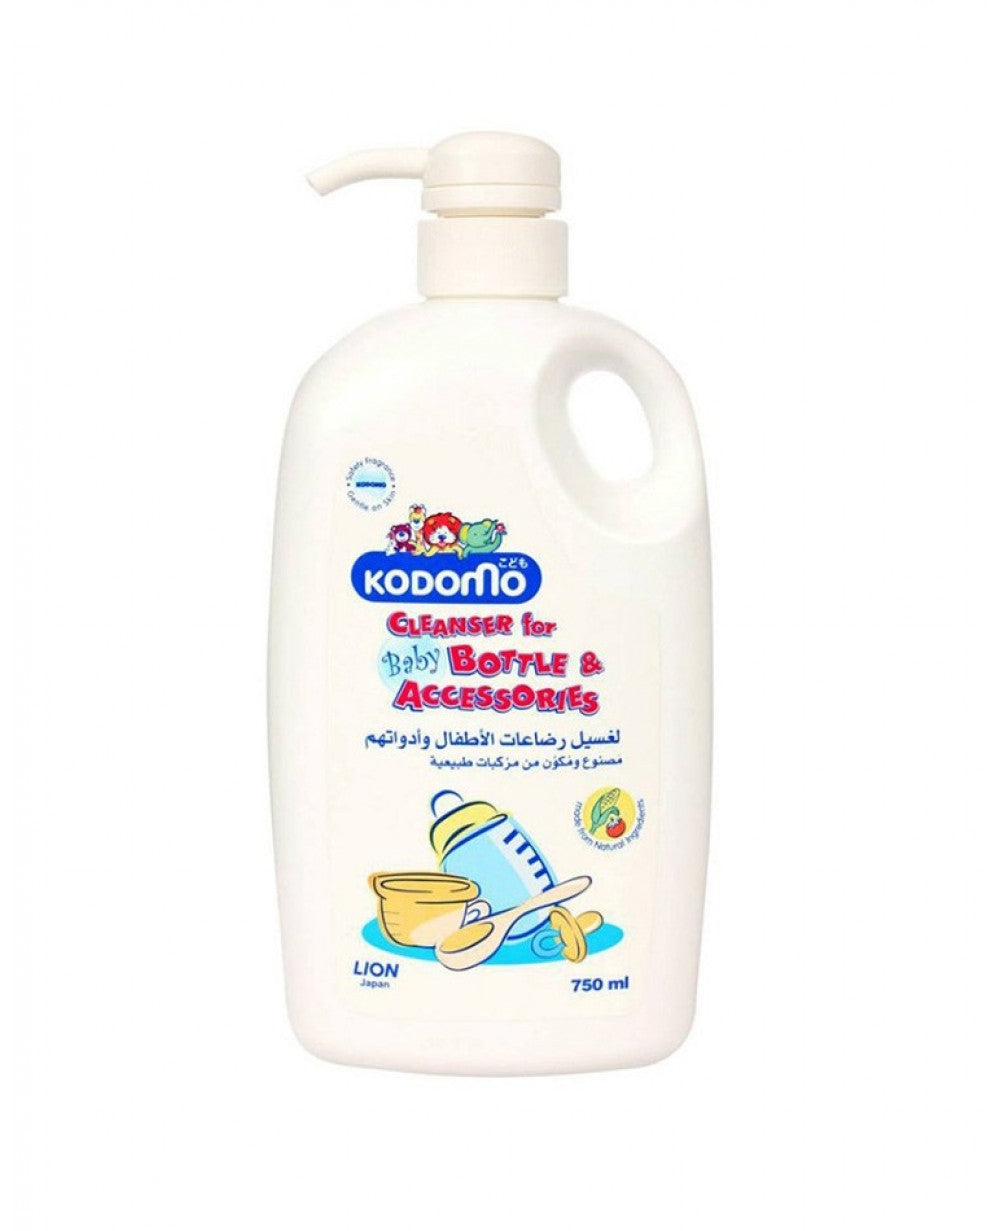 Kodomo Baby Cleanser For Bottle & Accessories 750ml